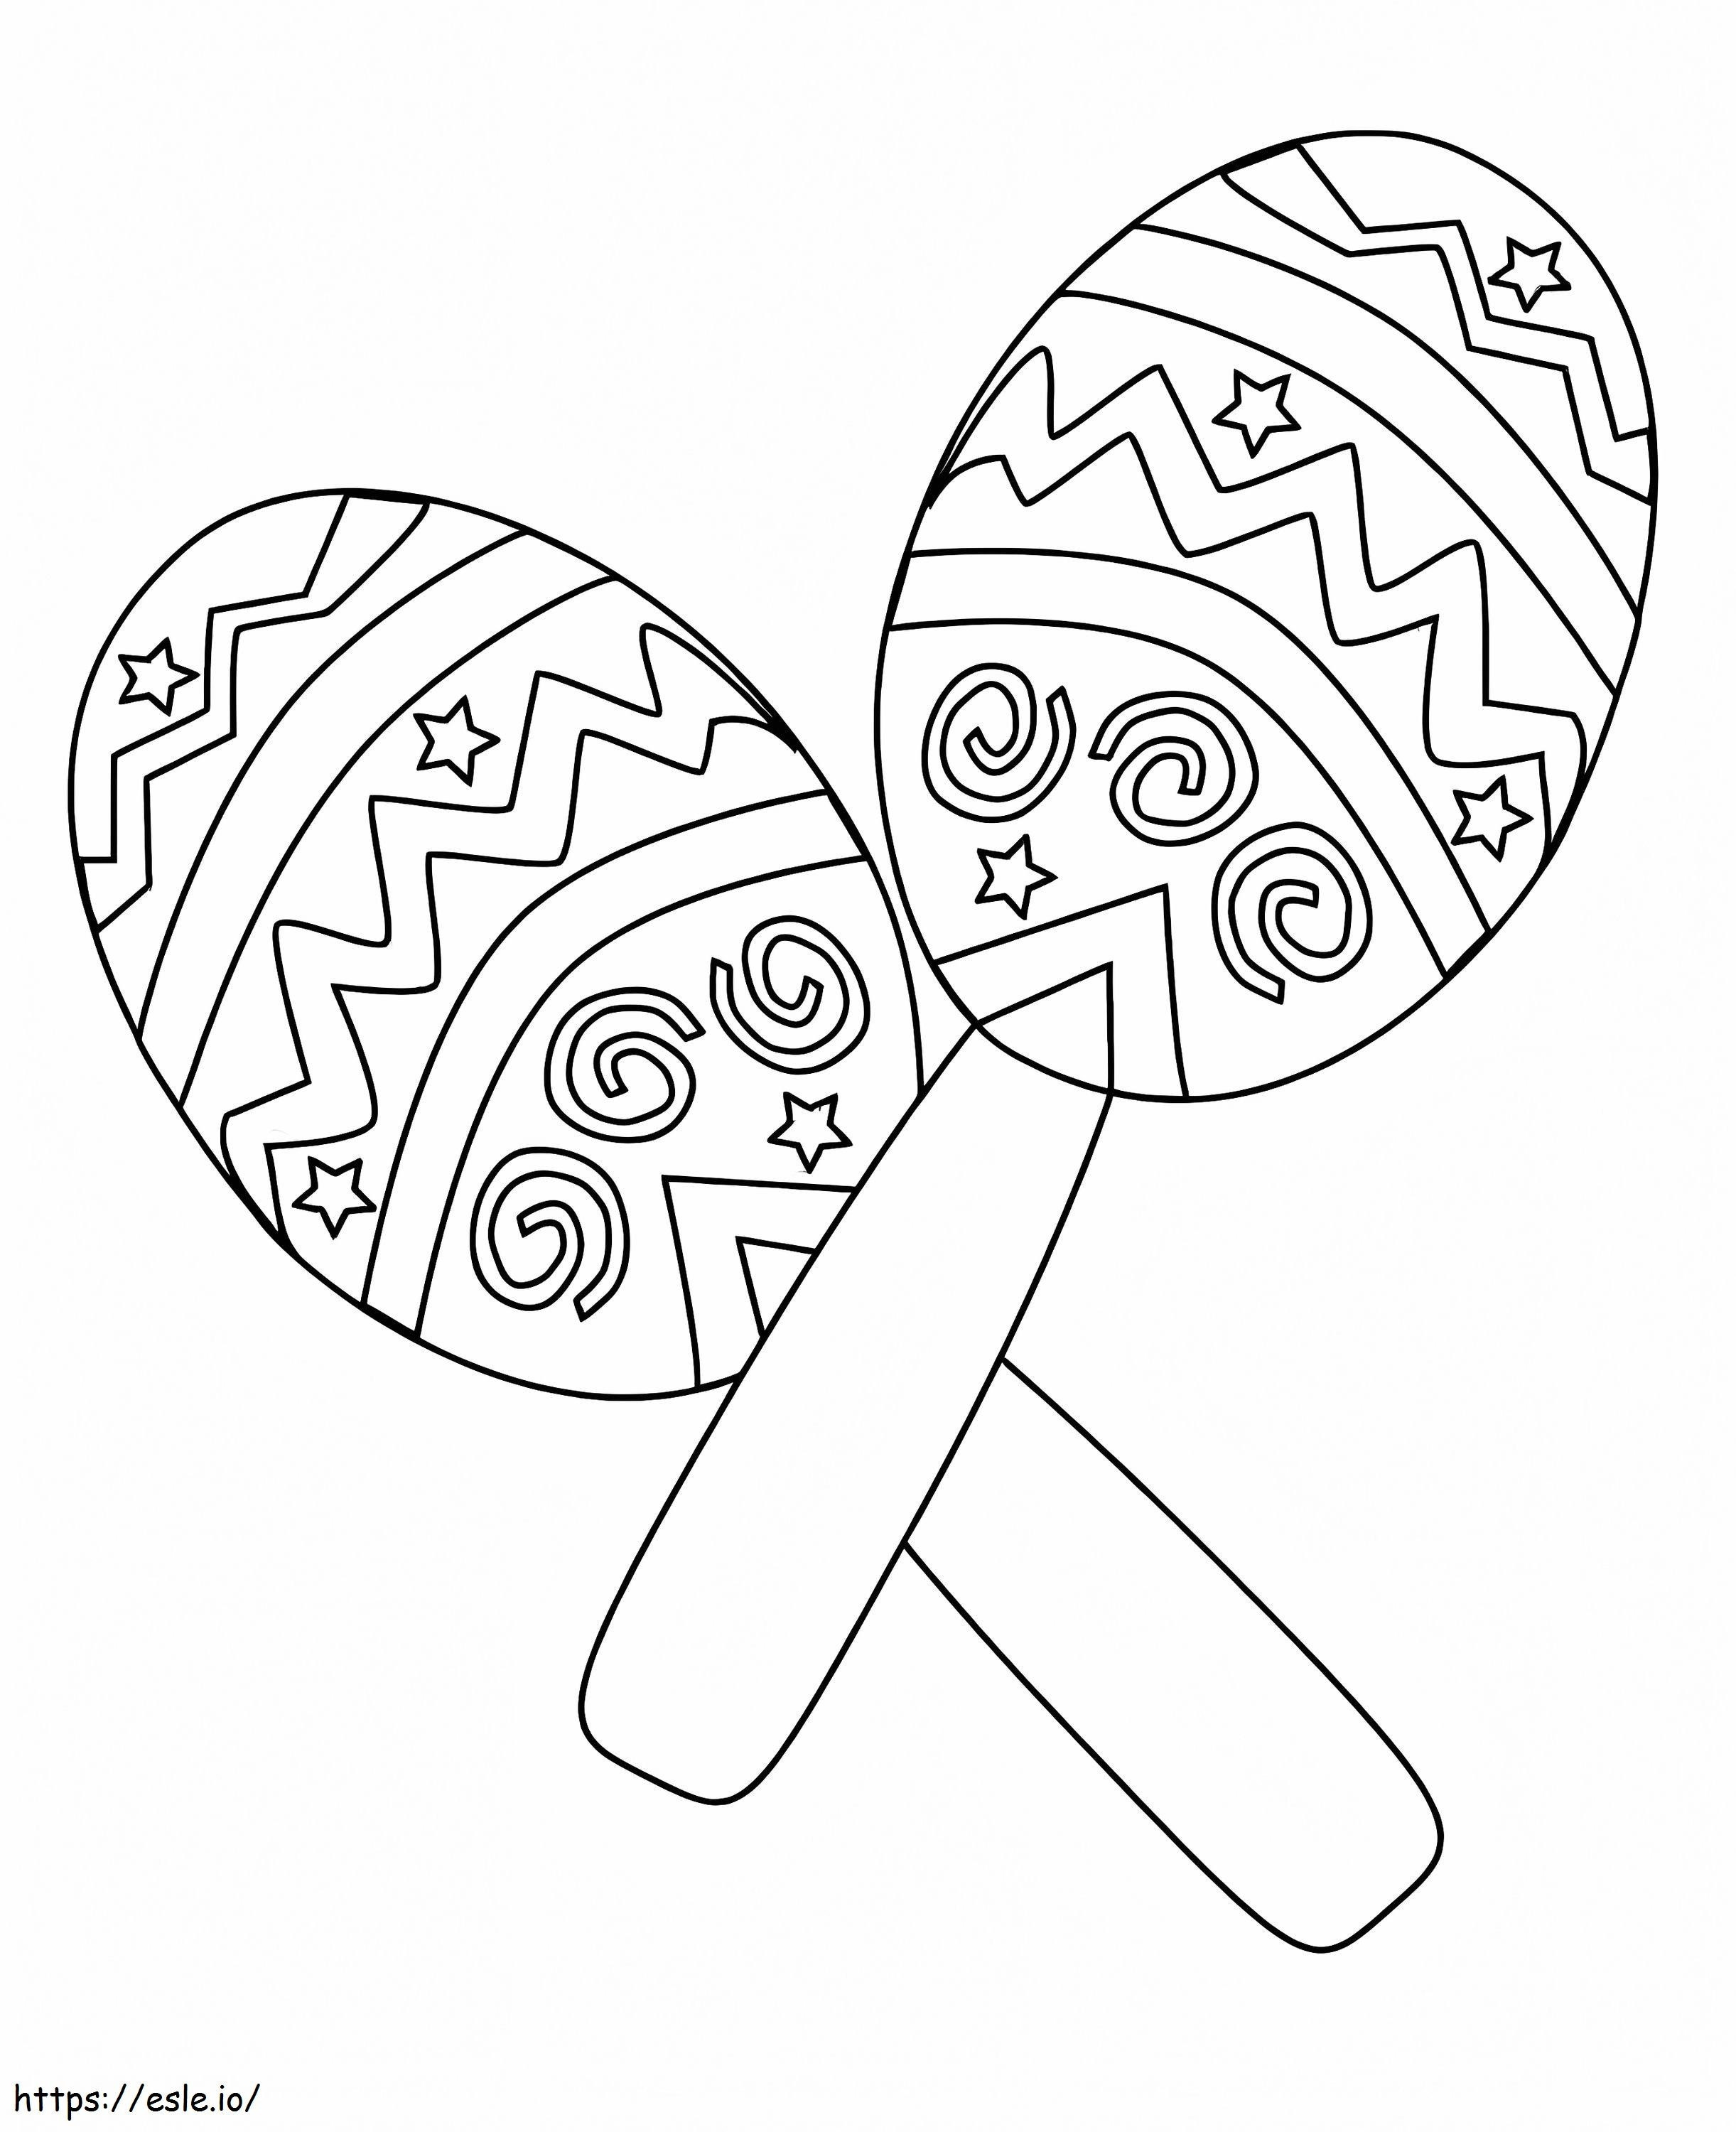 Cool Maracas coloring page